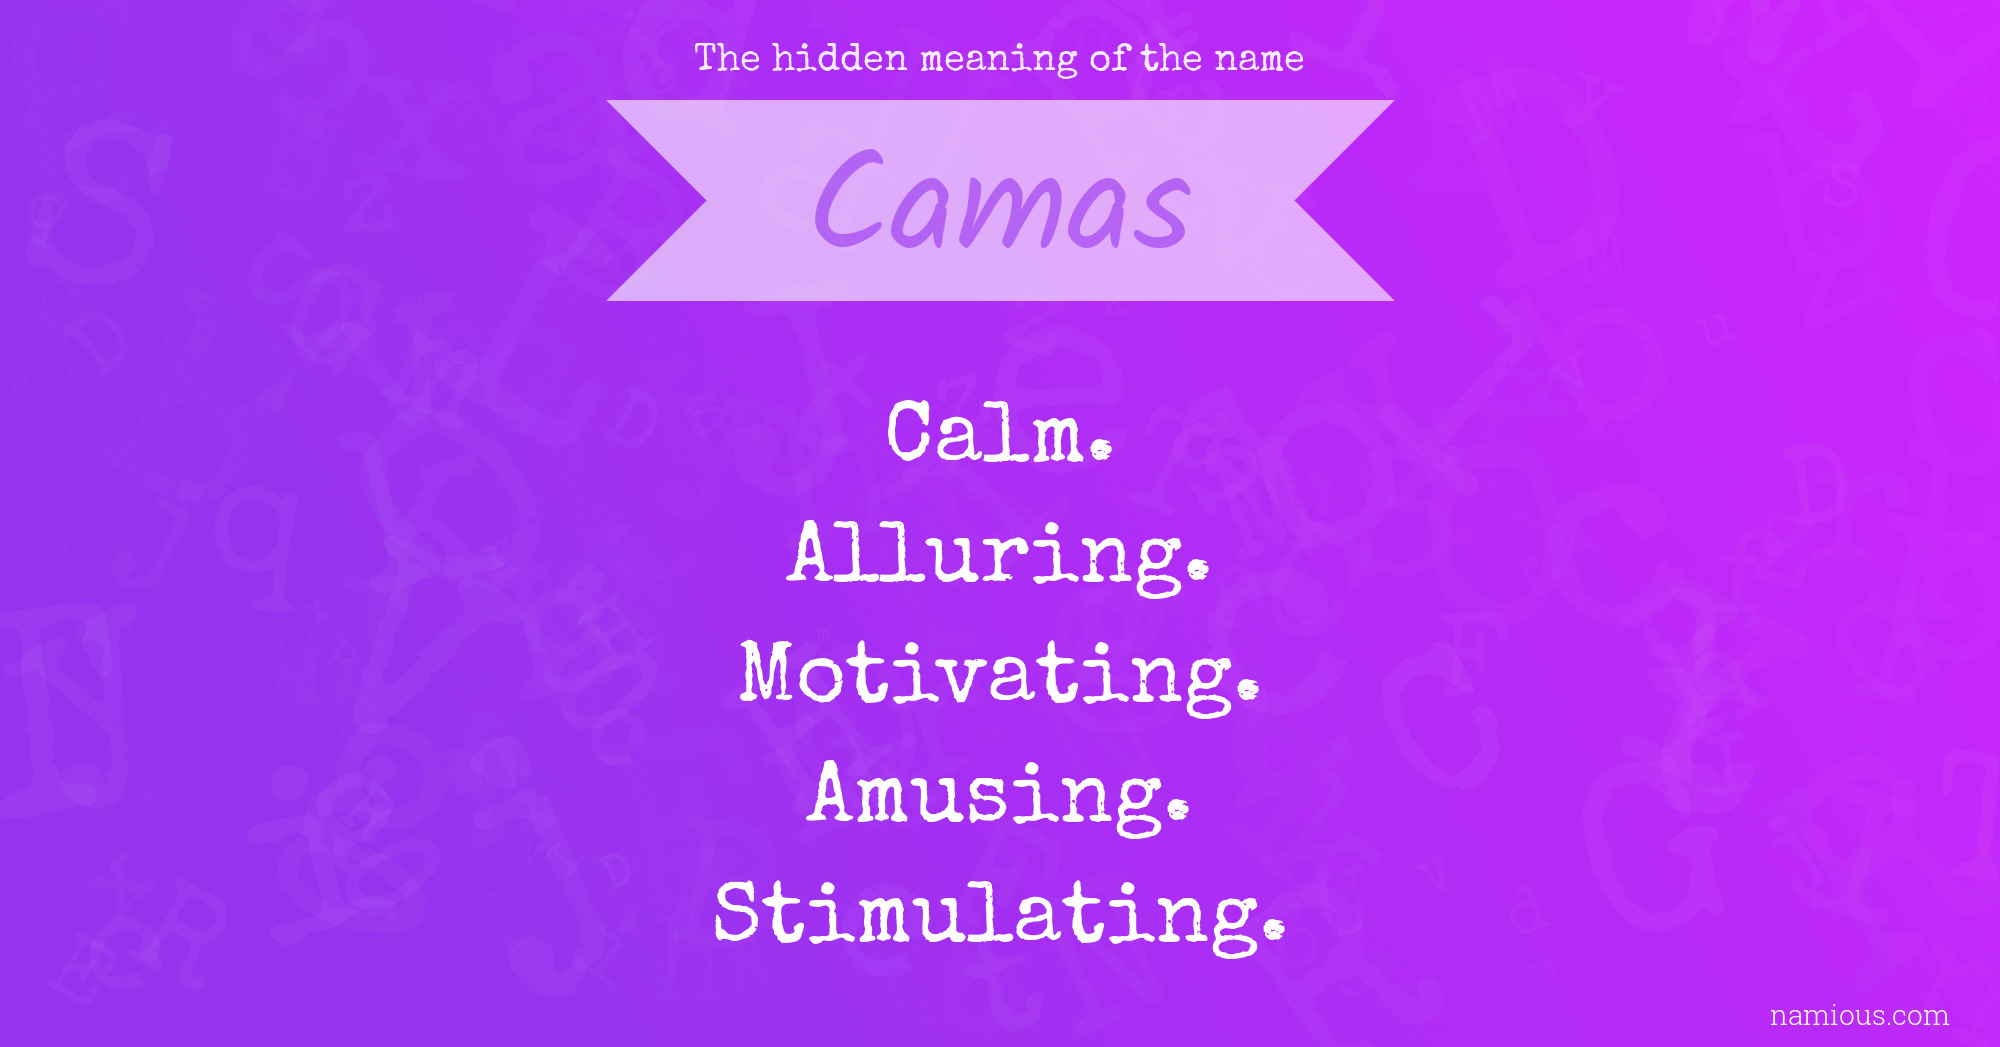 The hidden meaning of the name Camas